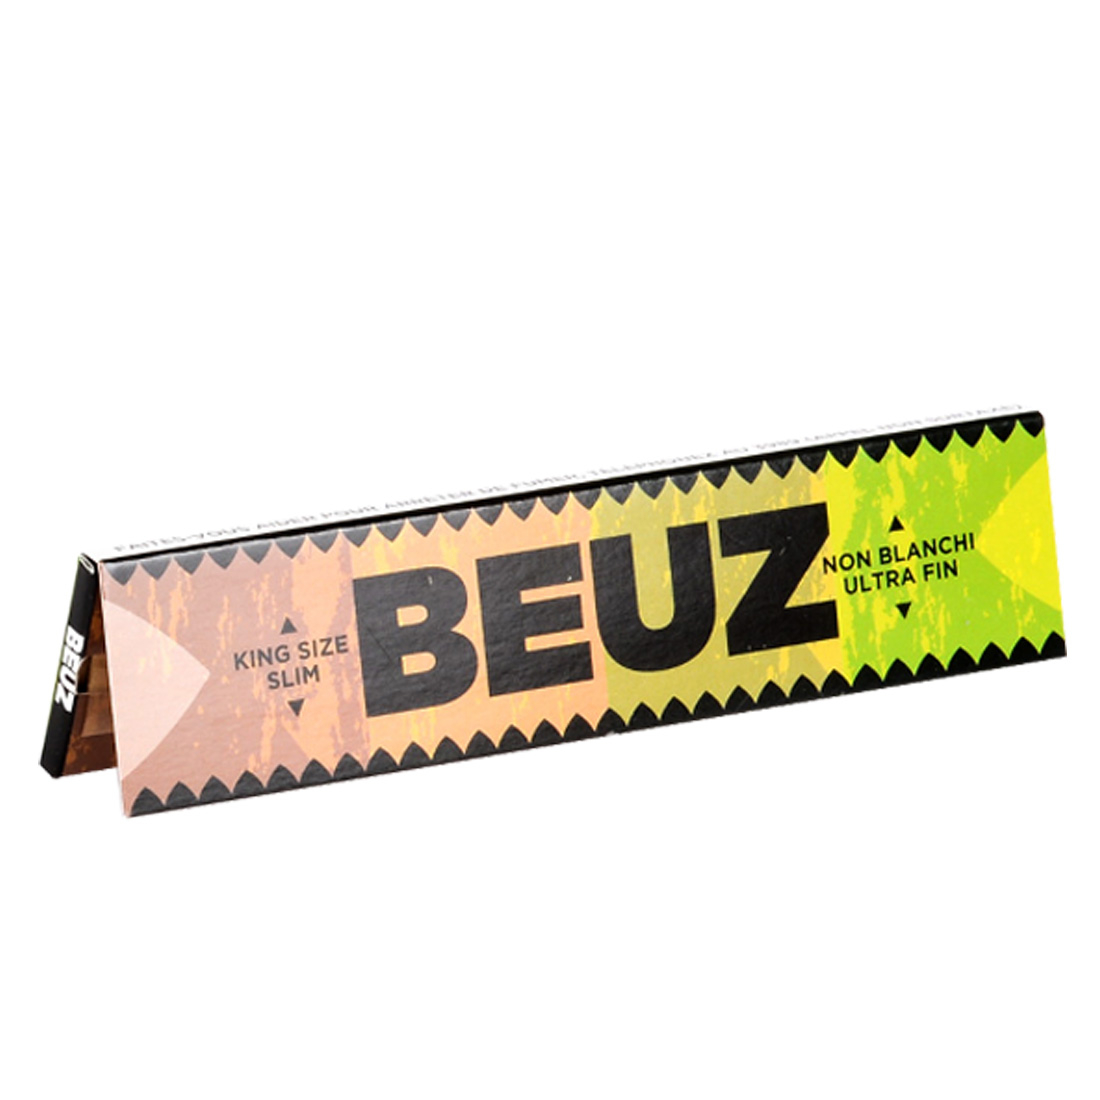 feuille non blanchie - beuz - planete-sfacoty.com